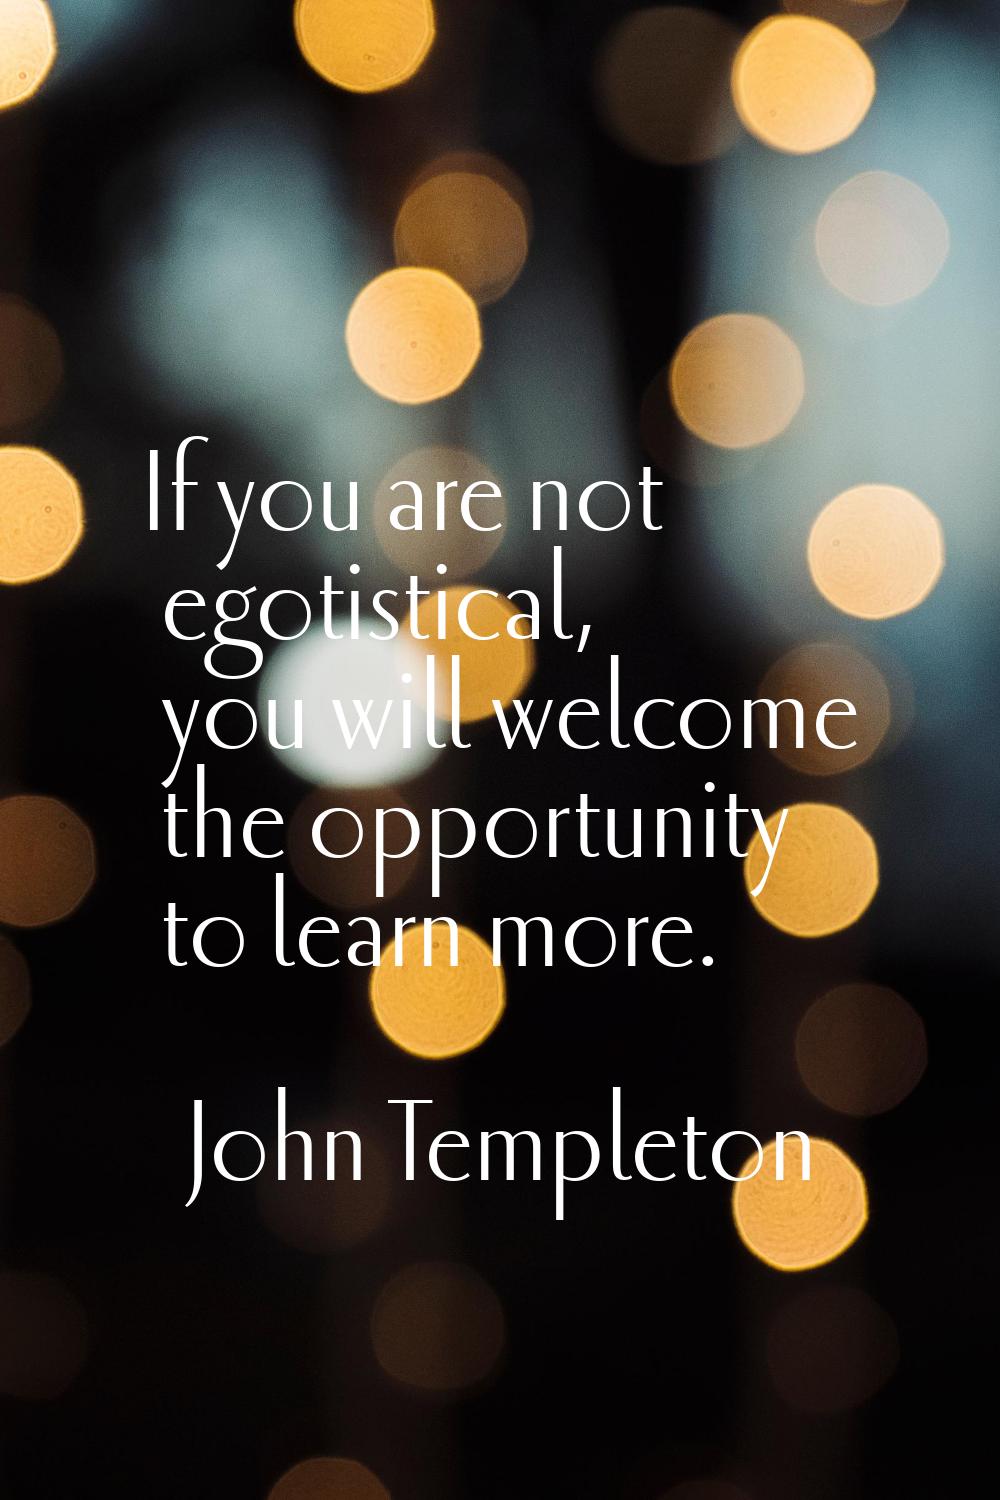 If you are not egotistical, you will welcome the opportunity to learn more.